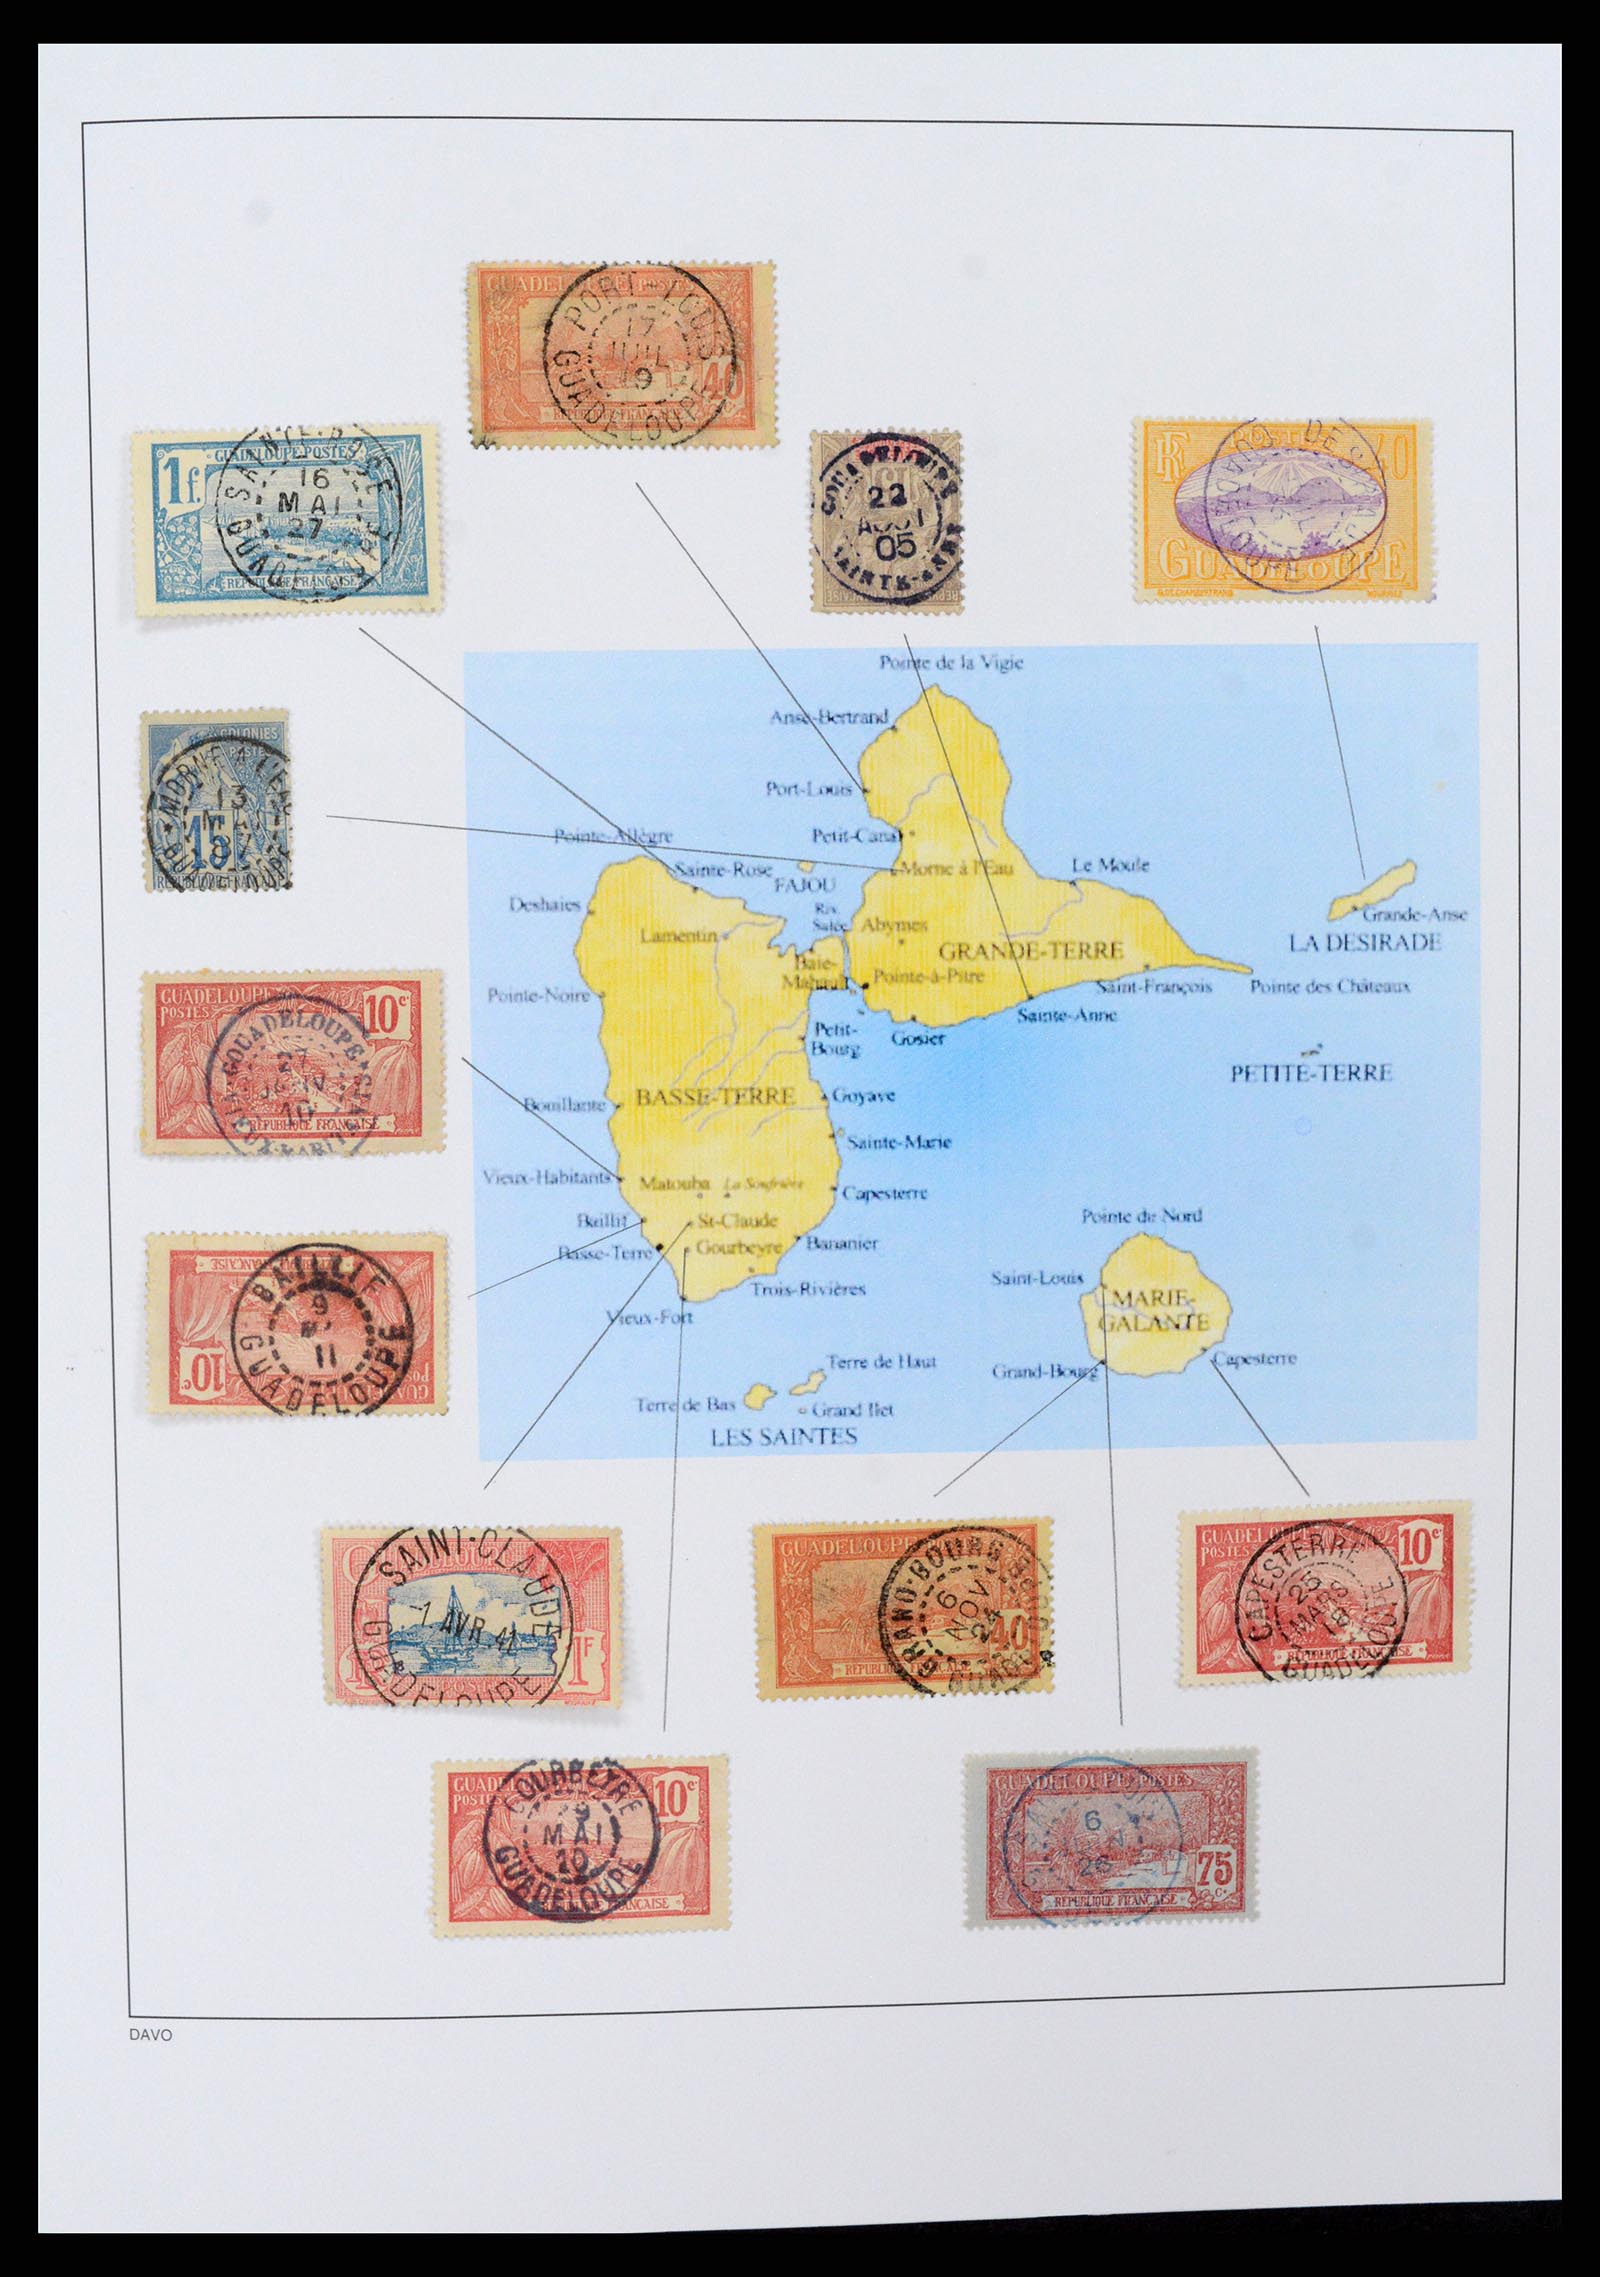 37480 011 - Stamp collection 37480 Guadeloupe supercollection 1823-1947.